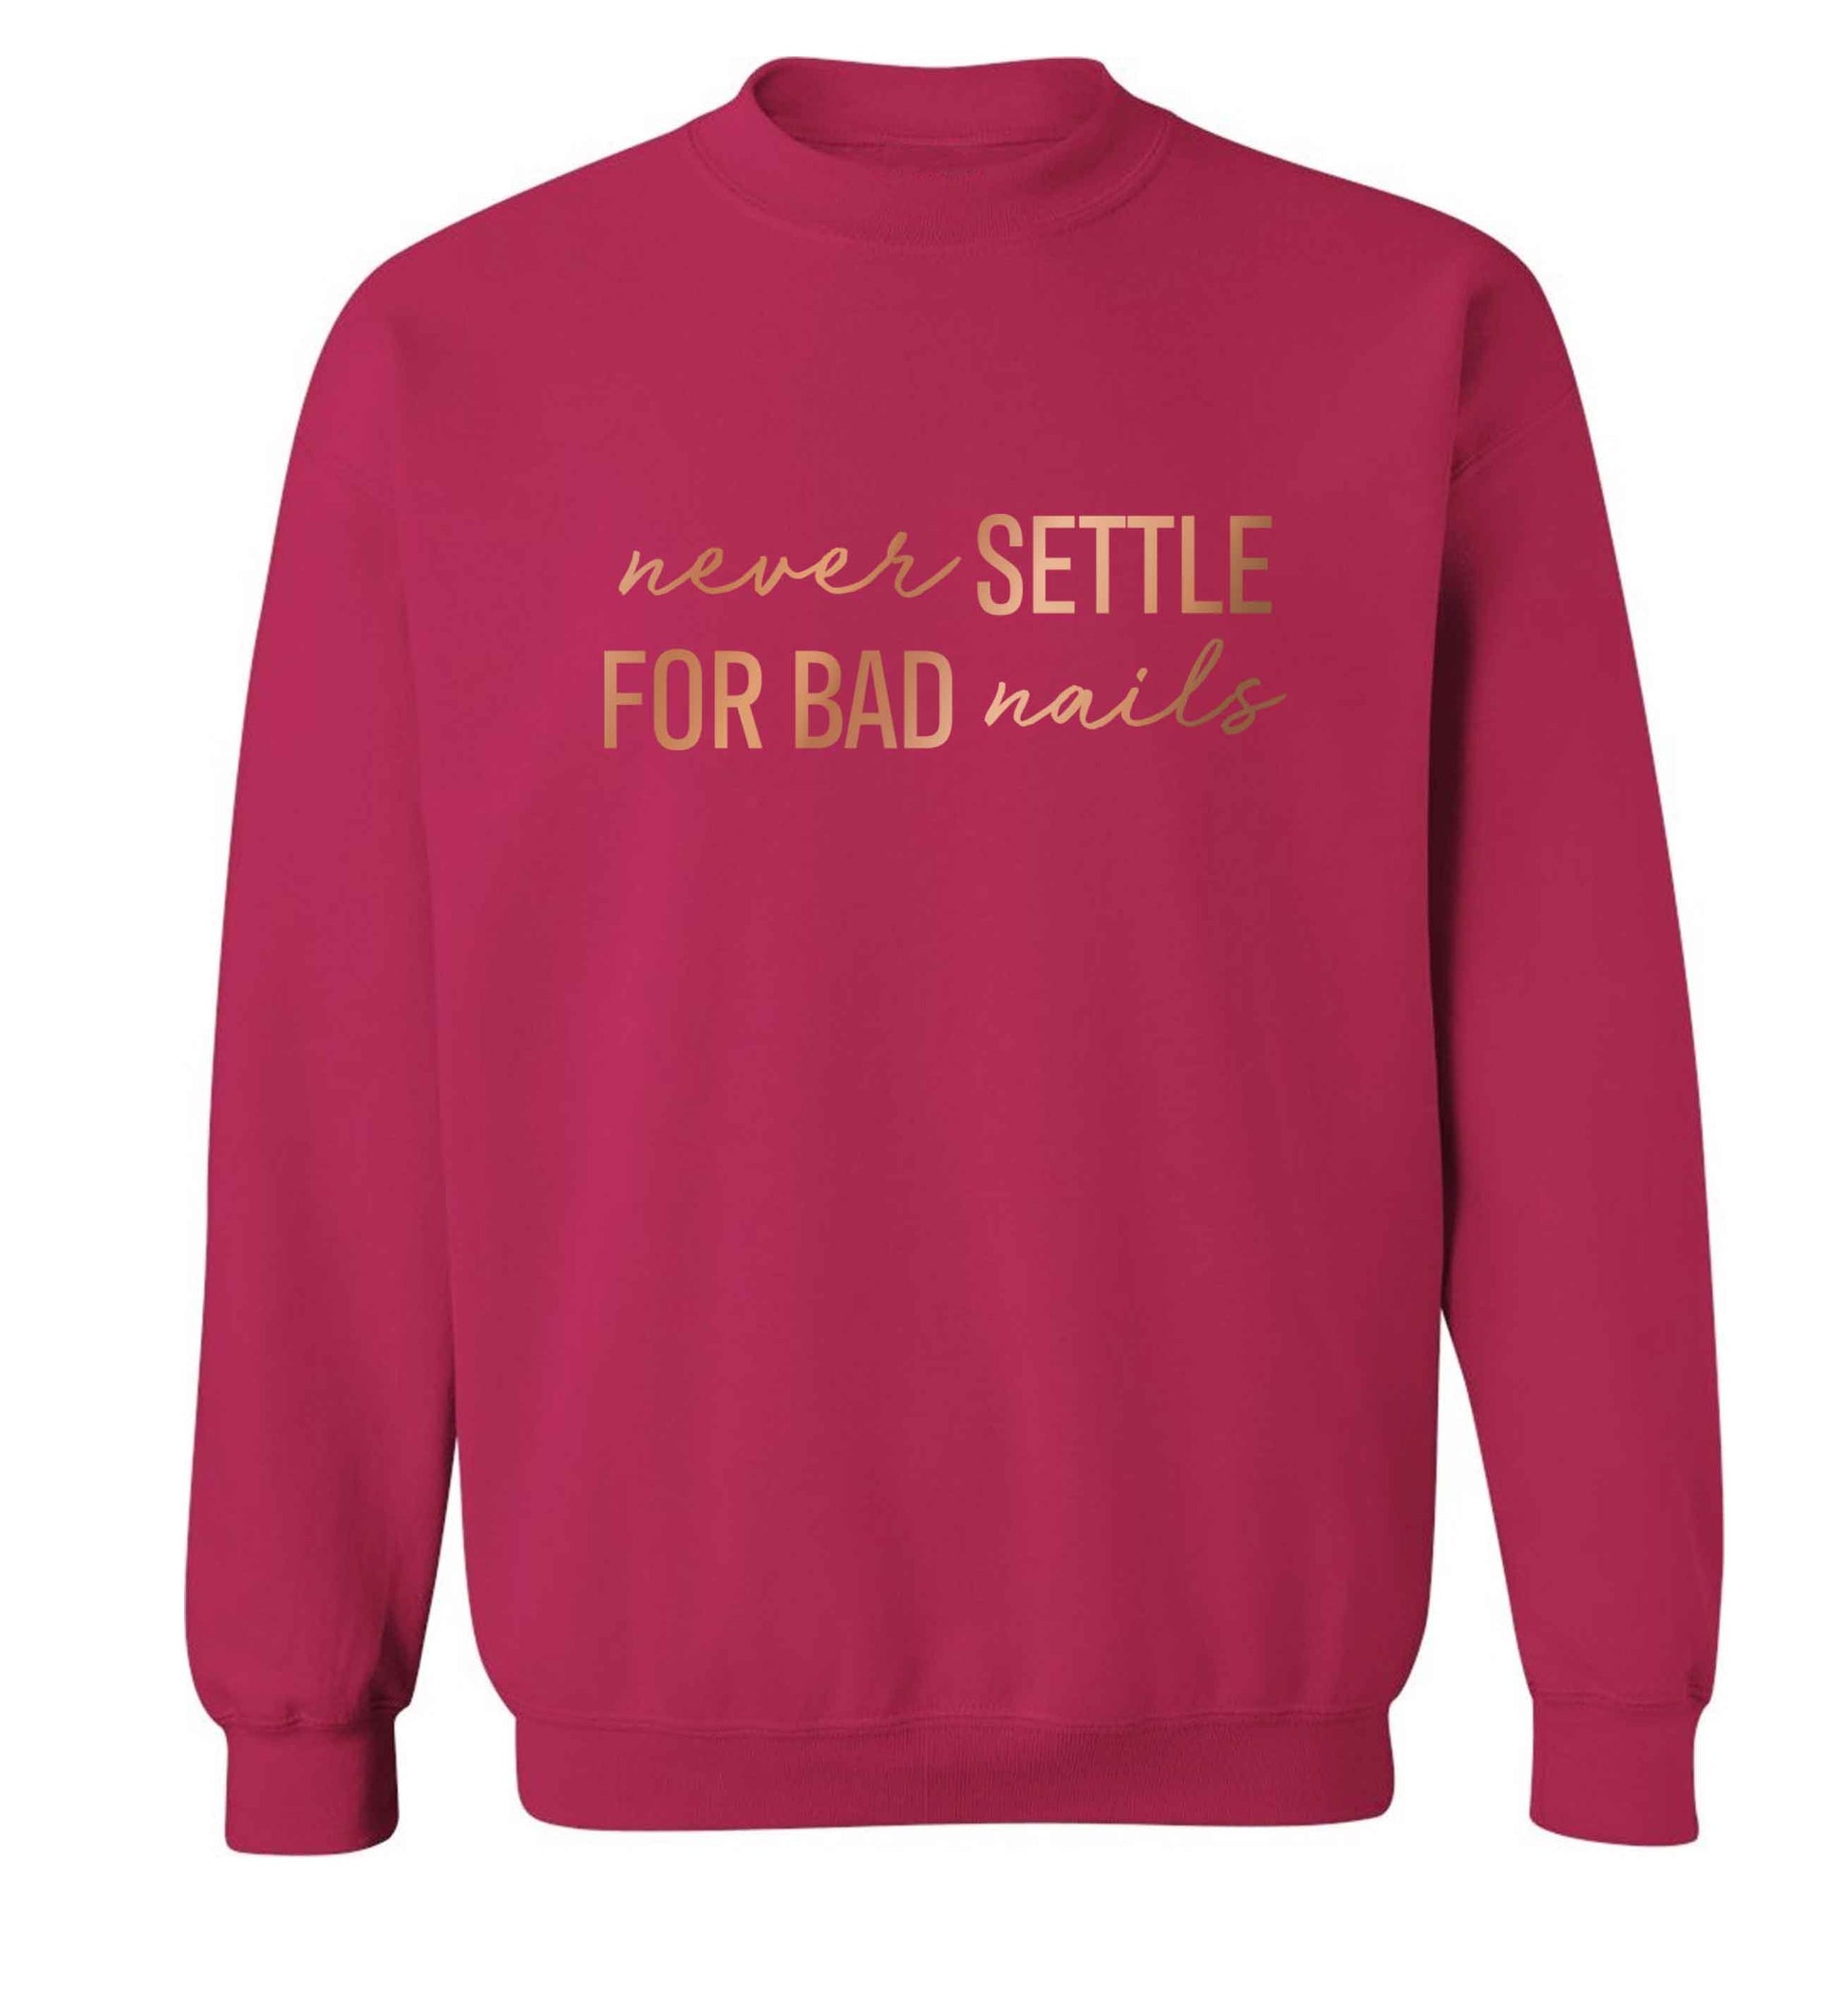 Never settle for bad nails - rose gold adult's unisex pink sweater 2XL